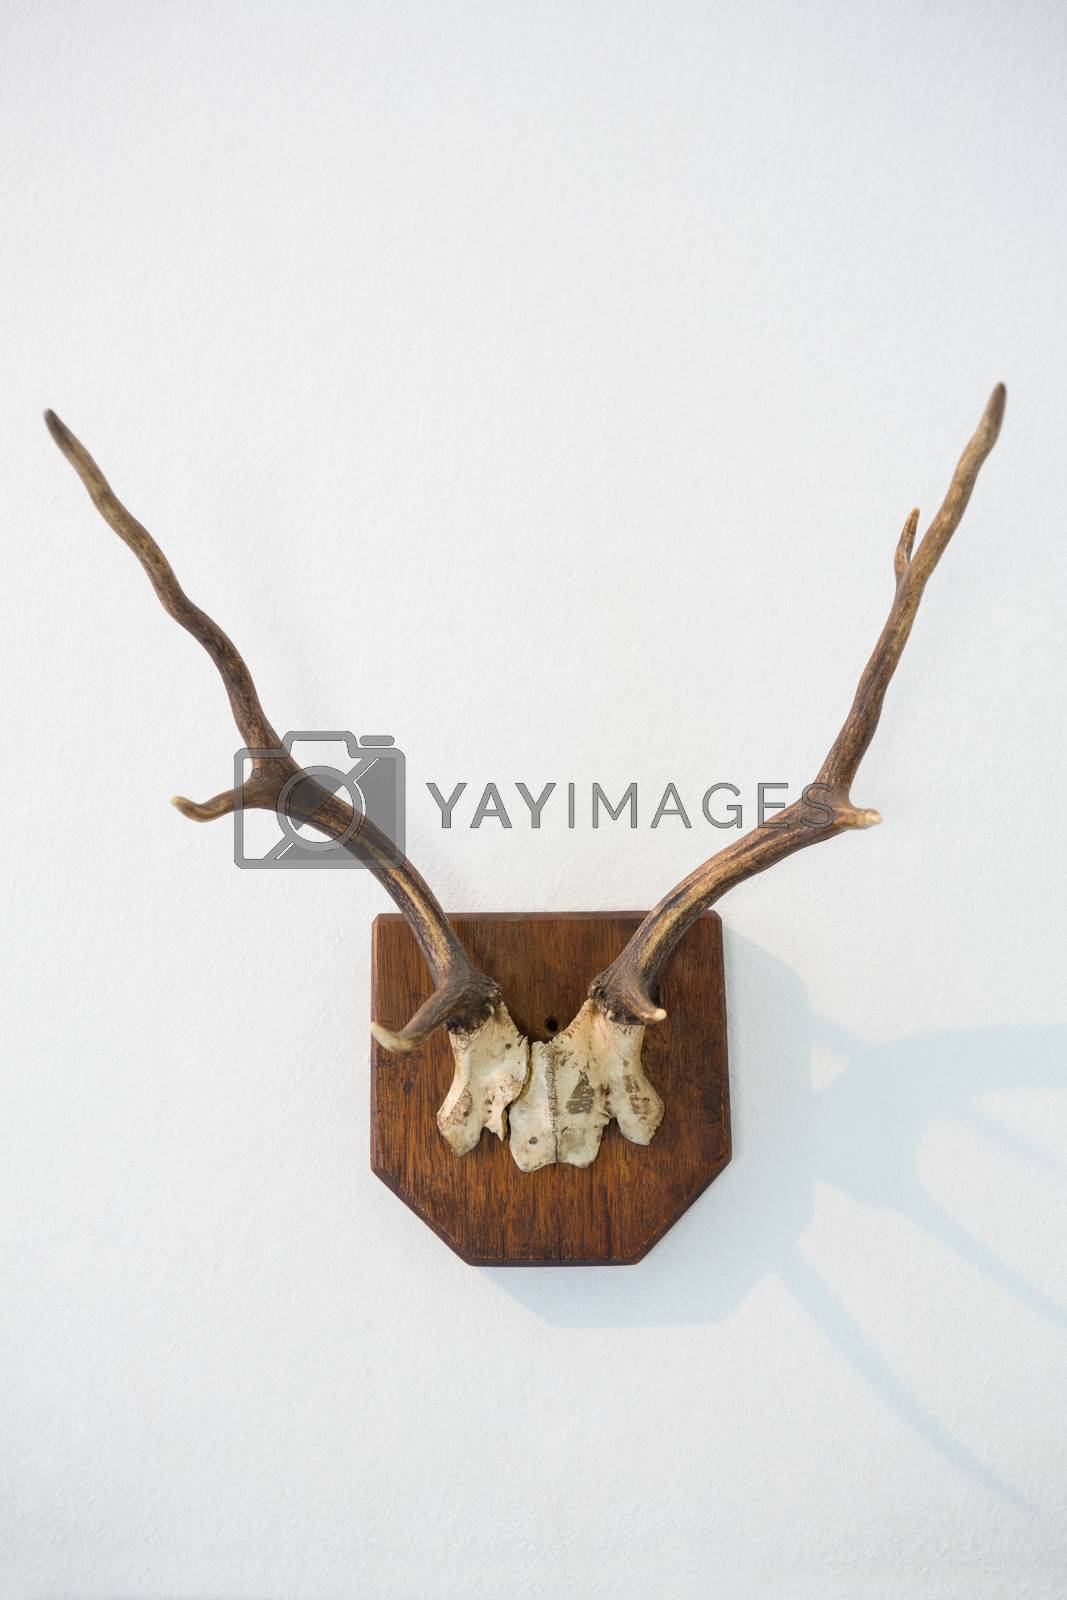 Royalty free image of Reindeer thorn on white background by Wavebreakmedia